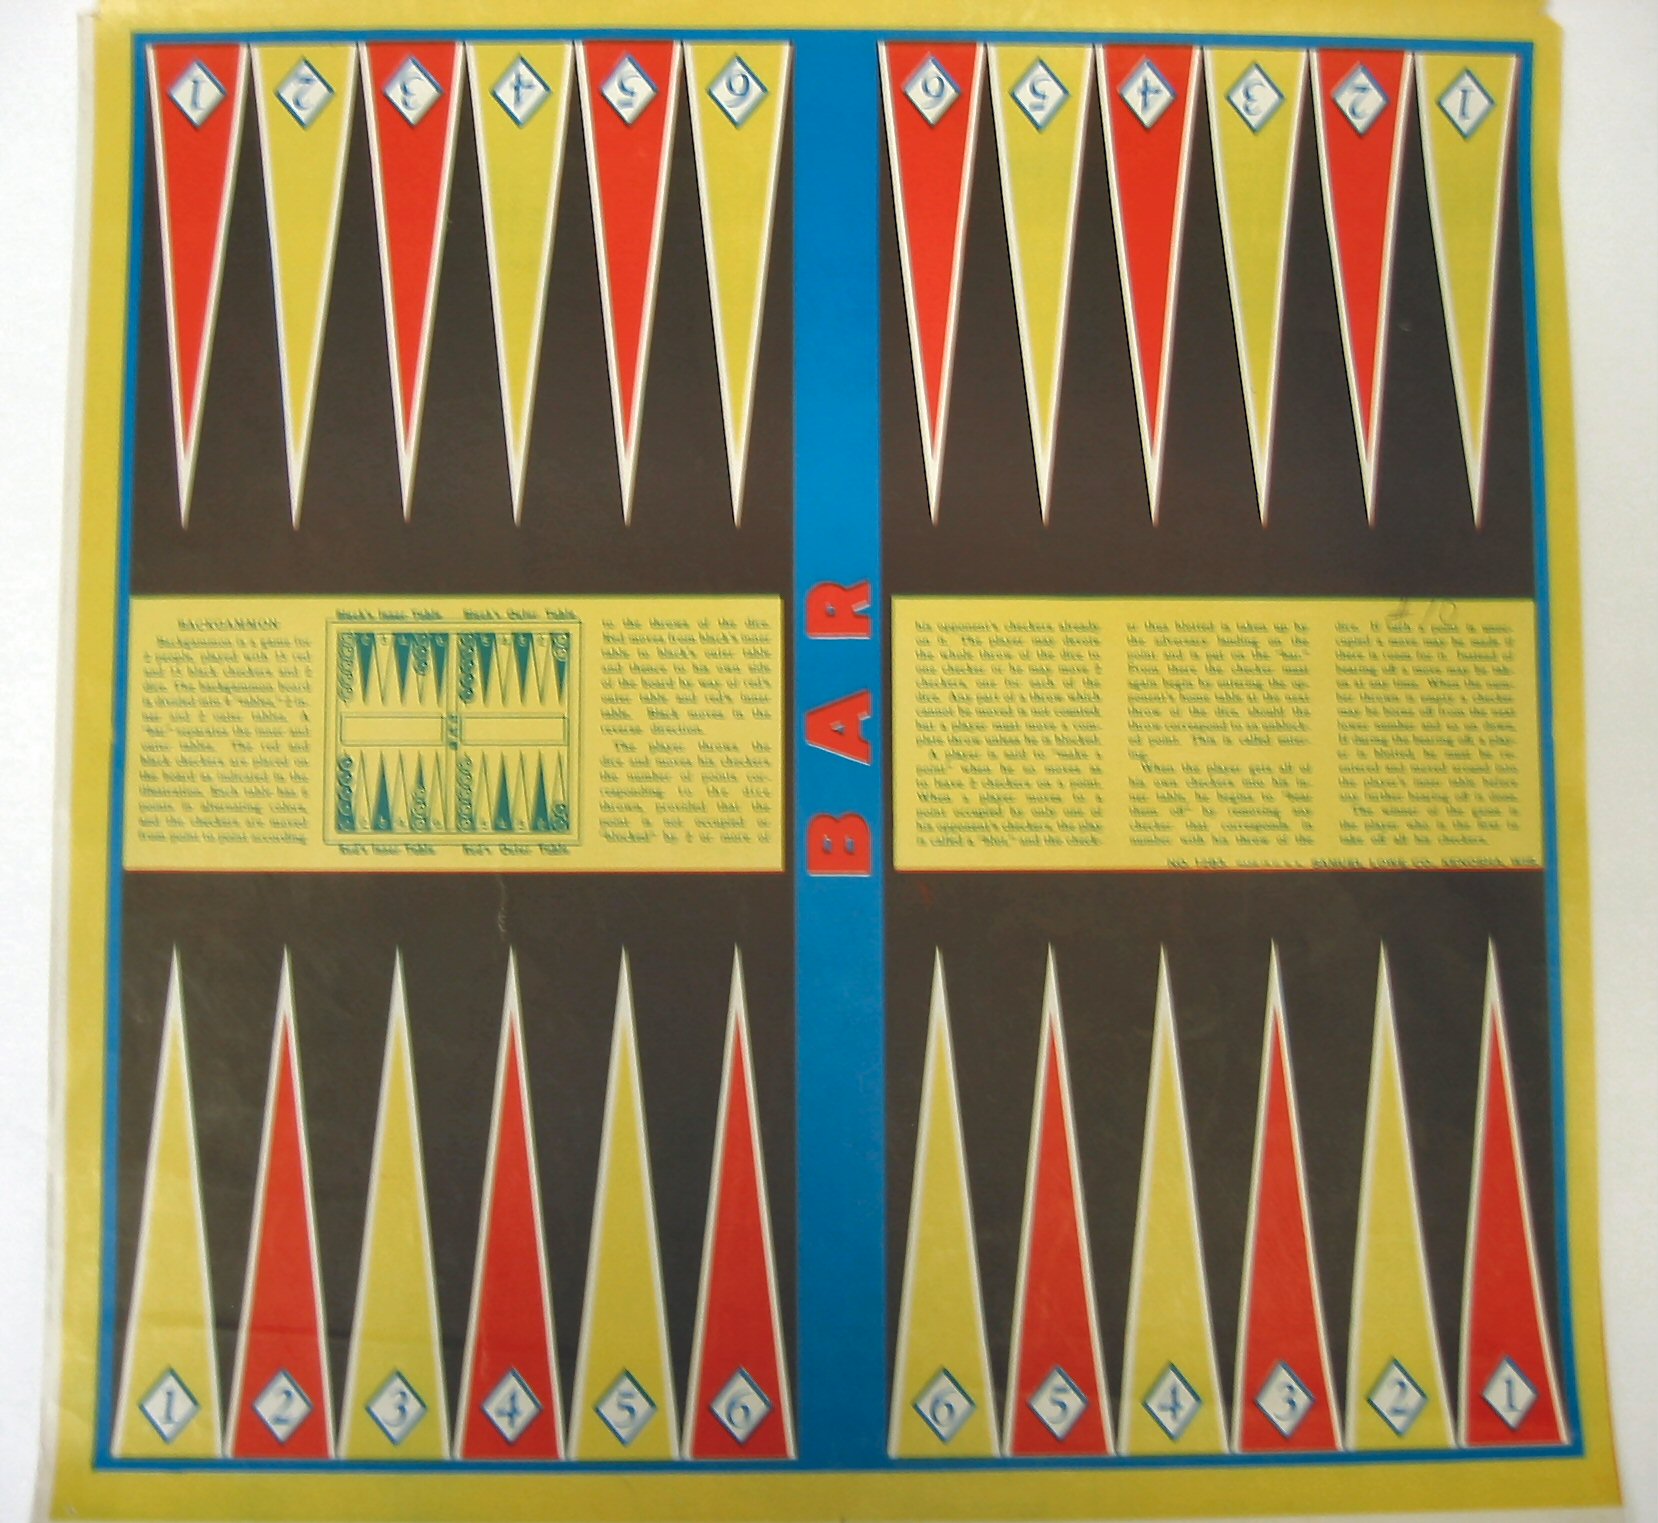 Backgammon with instructions